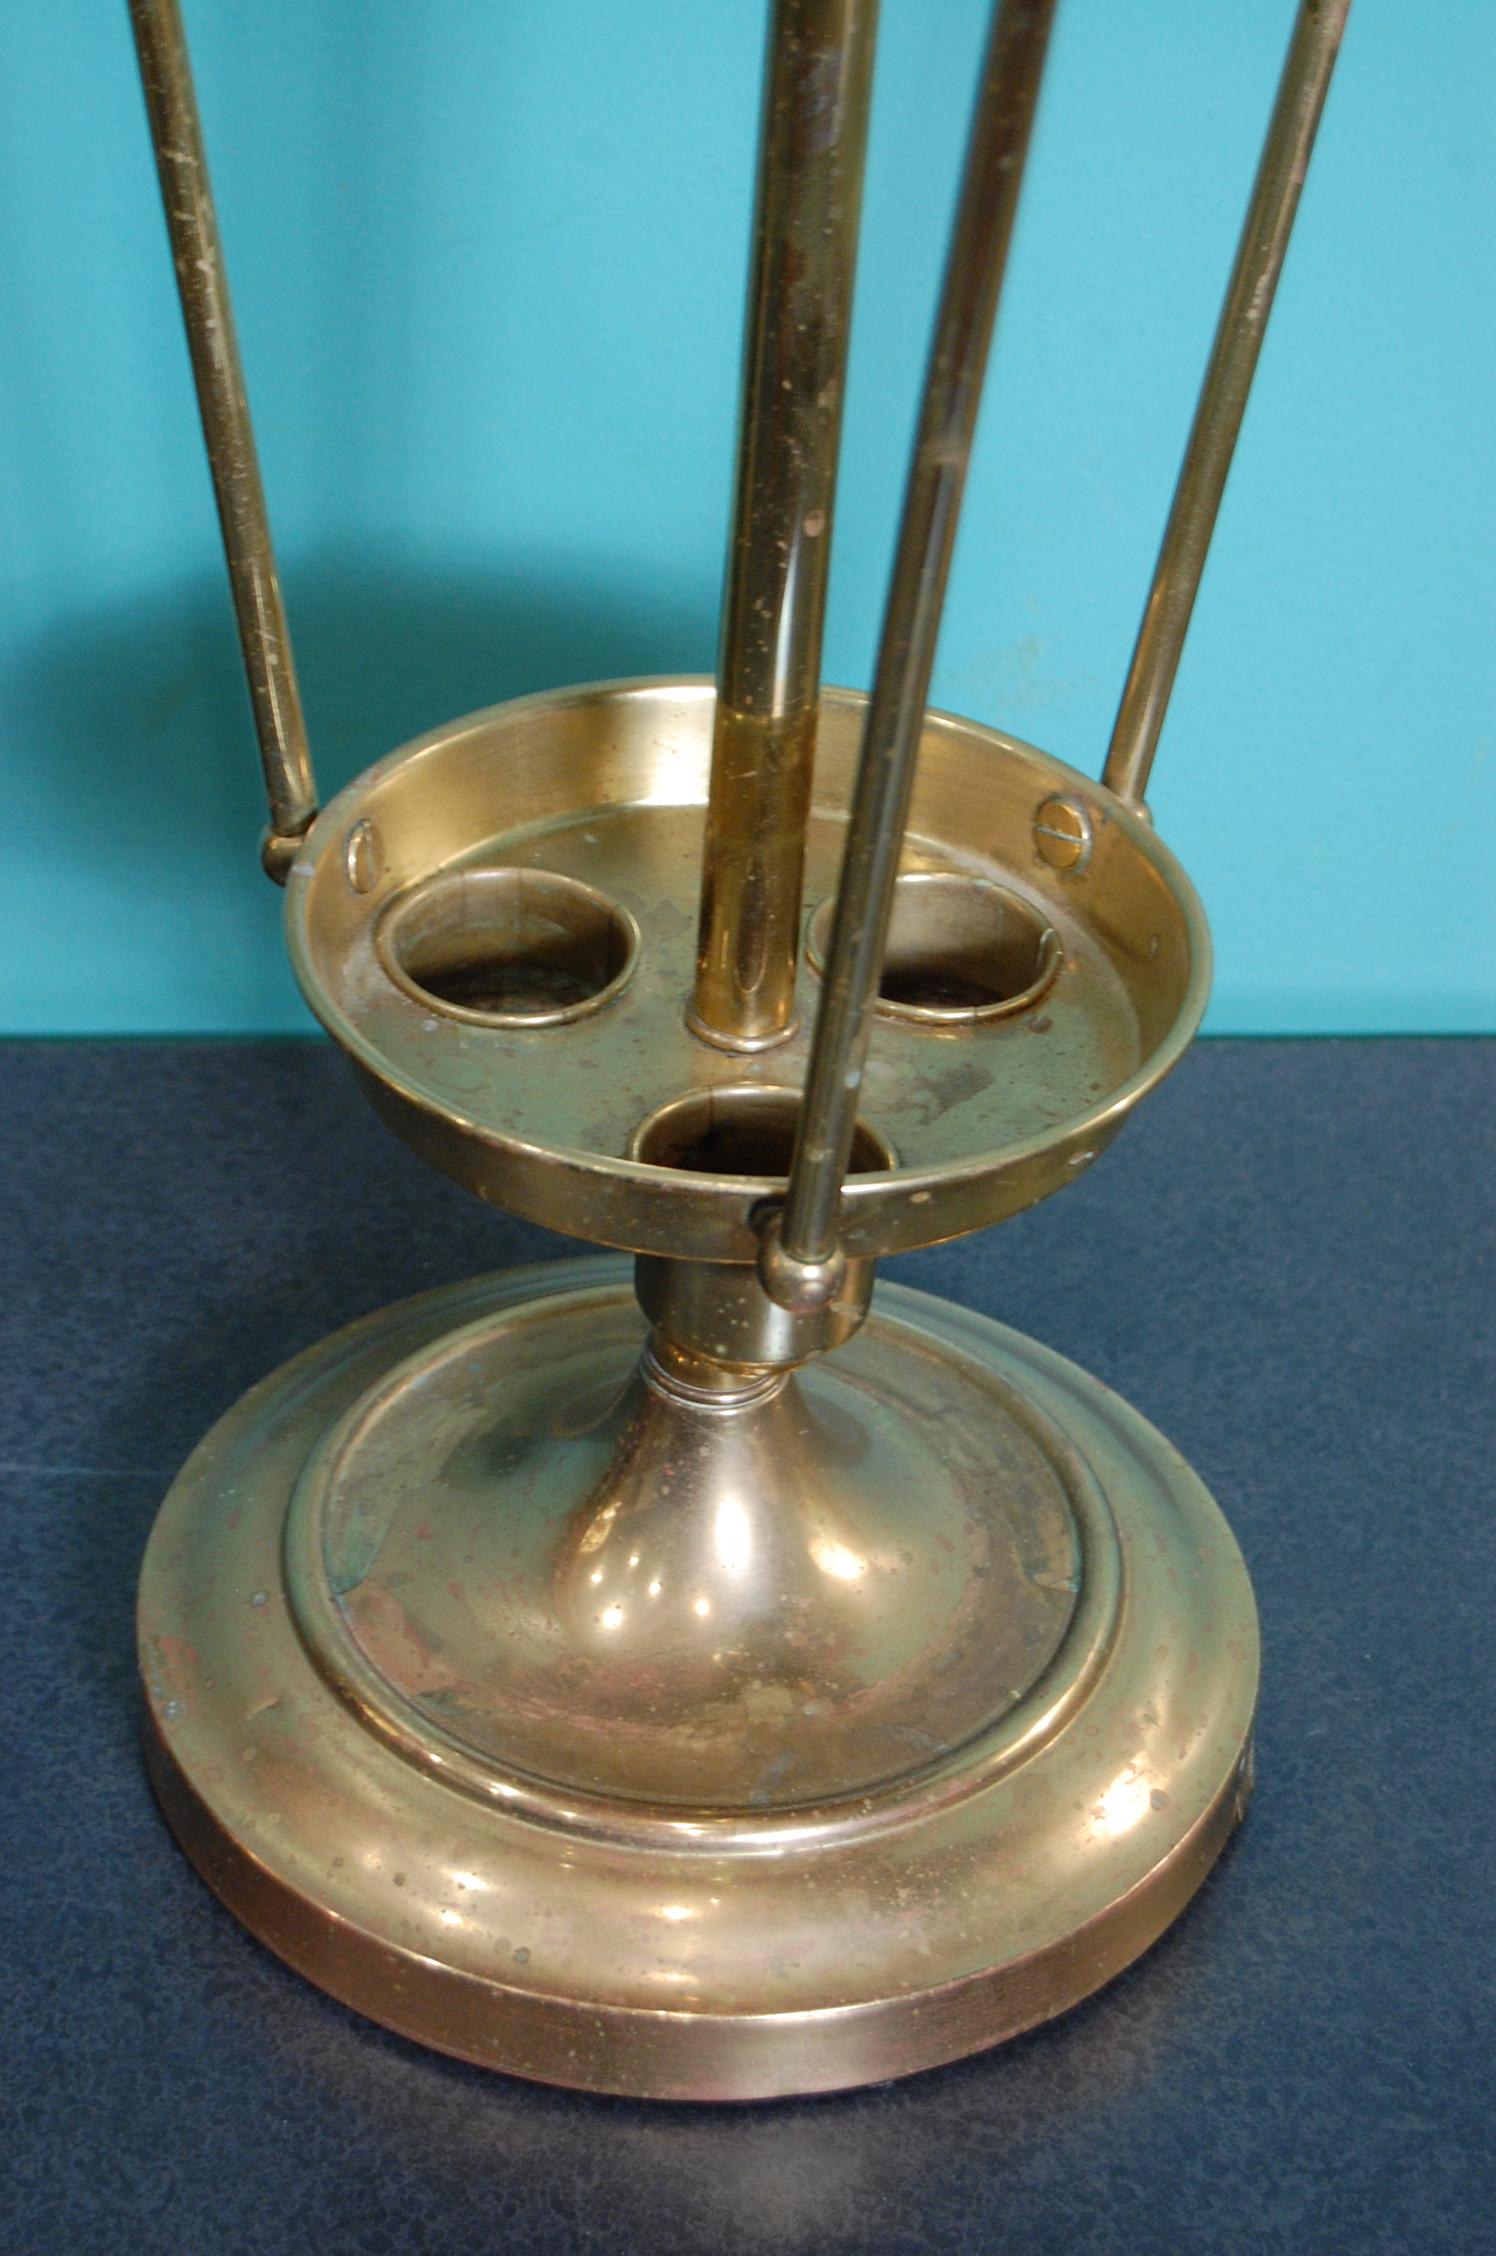 American Mid-20th Century Brass Umbrella Stand by Herco Art Manufacturing Company For Sale